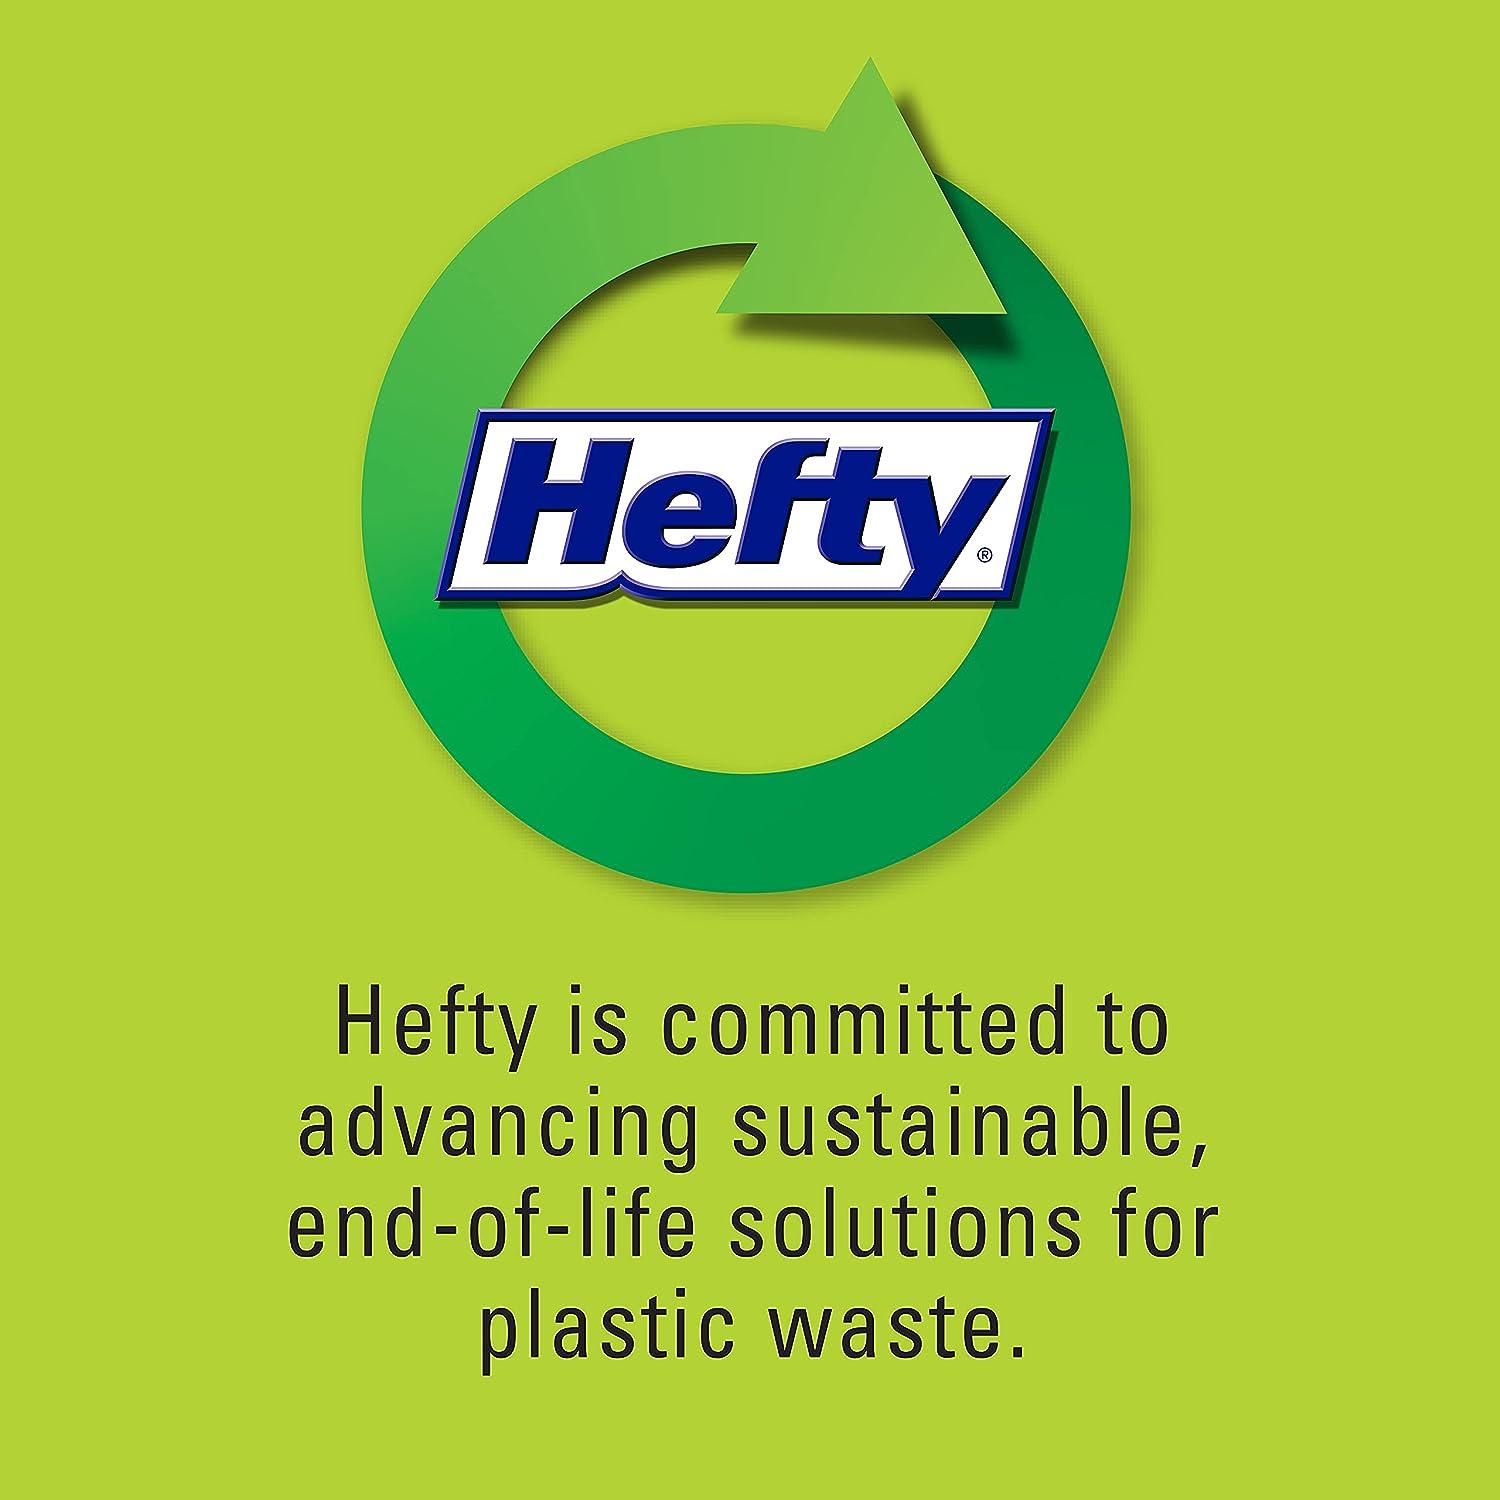  Hefty Trash Bags/Garbage Bags, Flap Tie, Tropical Paradise  Scent, Small 4 Gallon, 26 Count : Health & Household